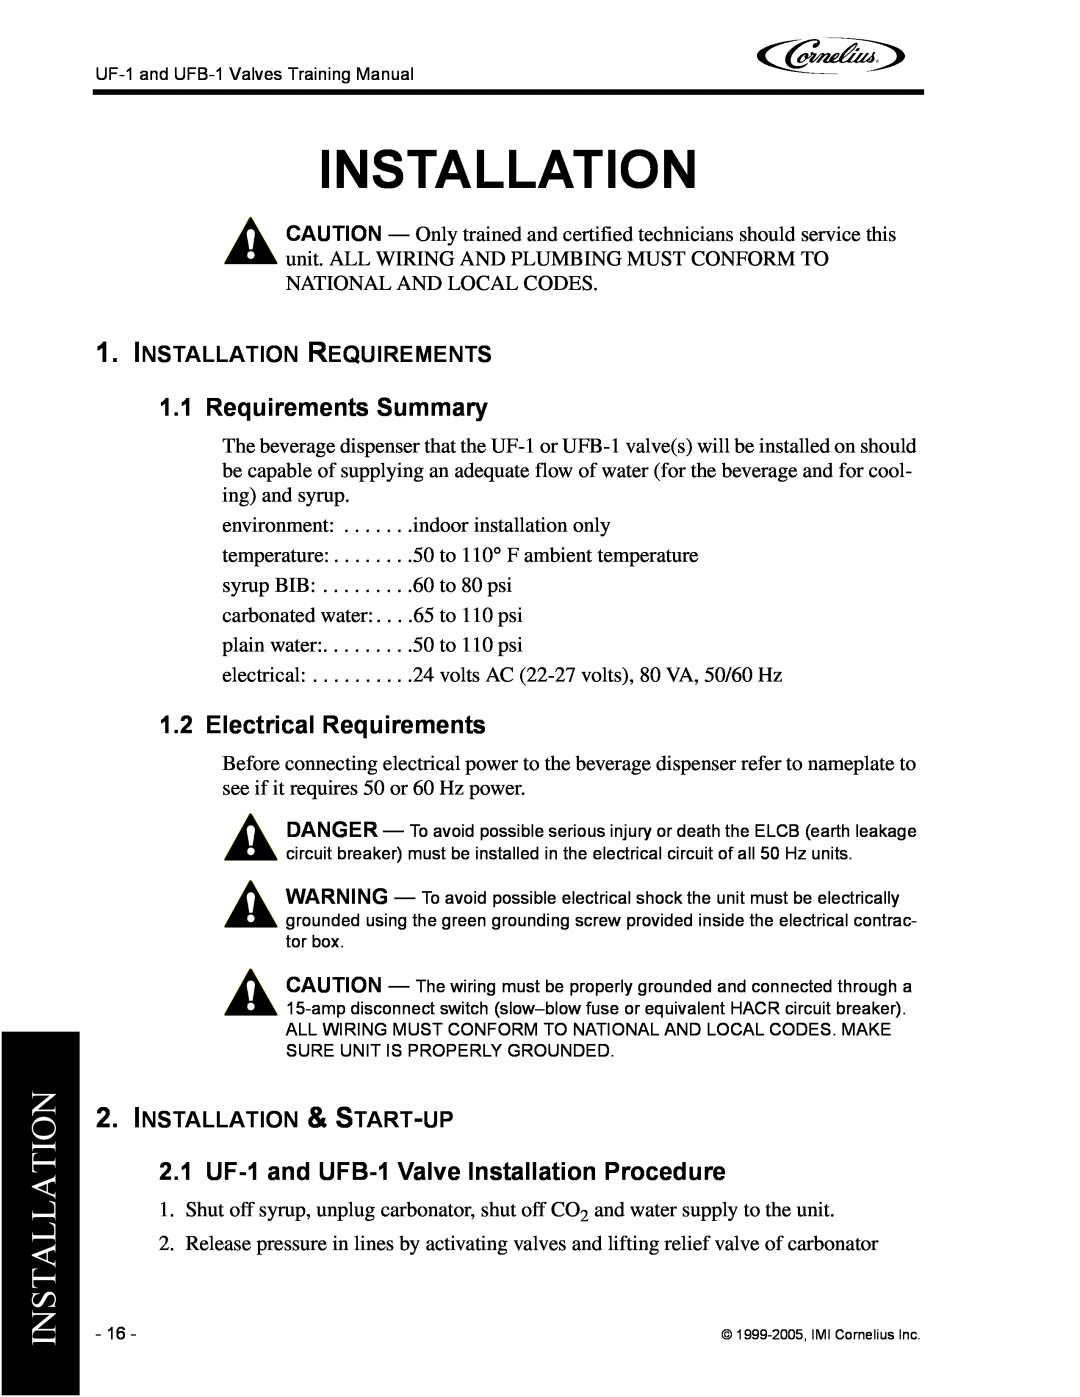 Cornelius manual Requirements Summary, Electrical Requirements, 2.1 UF-1and UFB-1Valve Installation Procedure 